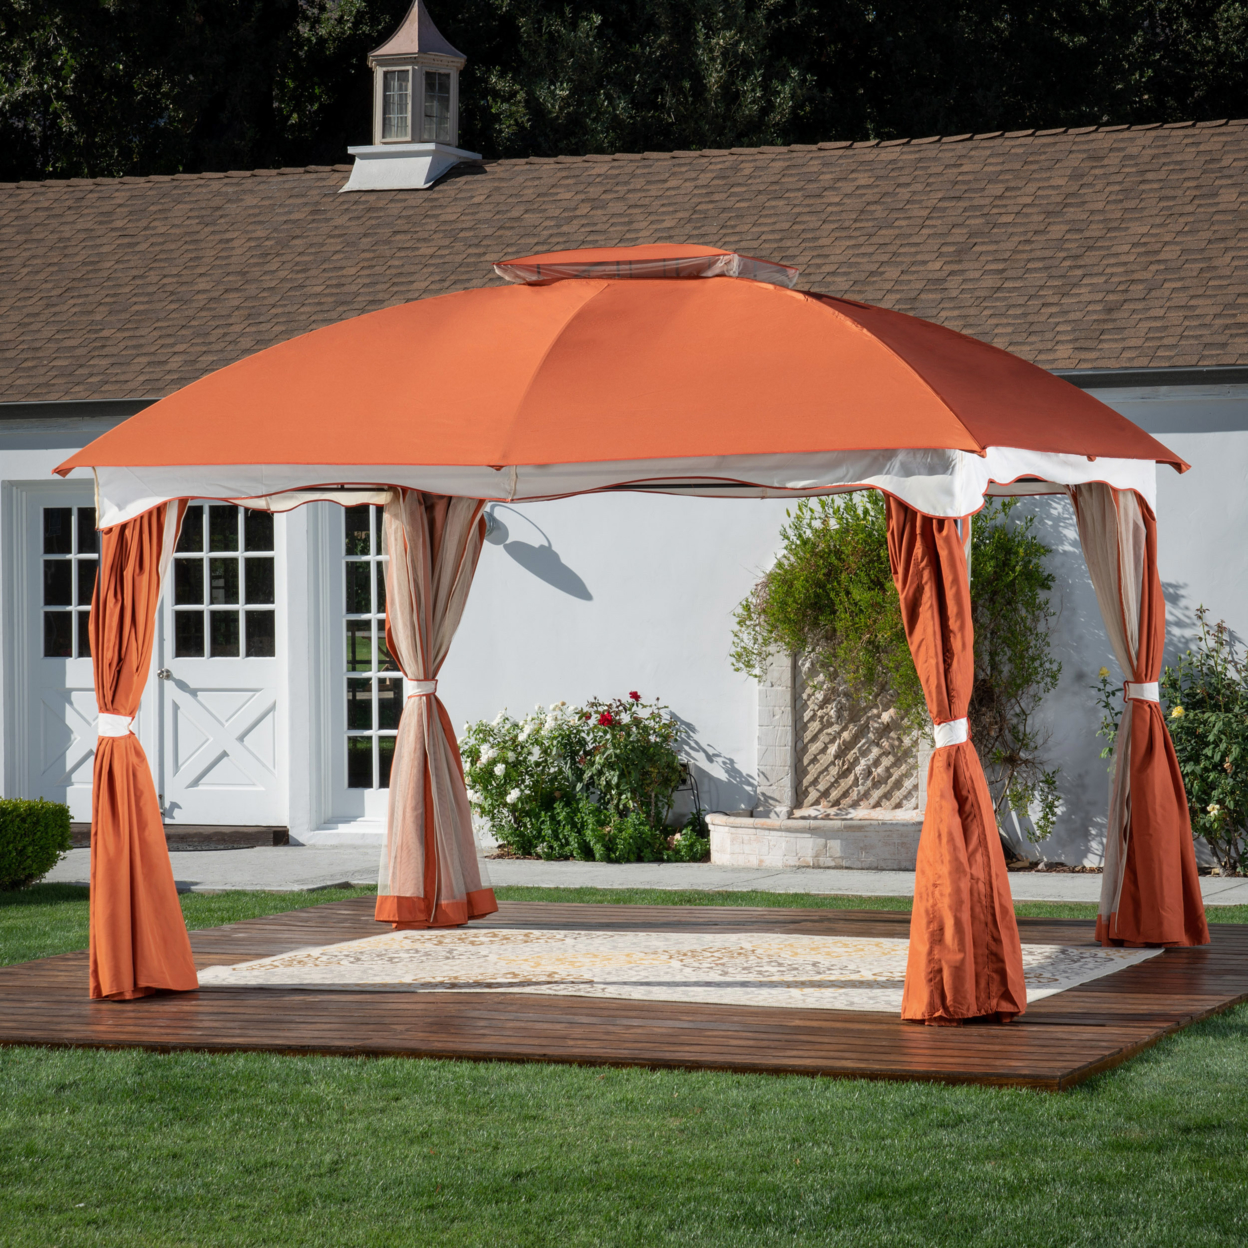 Ava Outdoor 12by10-foot Water Resistant Fabric And Steel Gazebo - Canvas Rust Orange